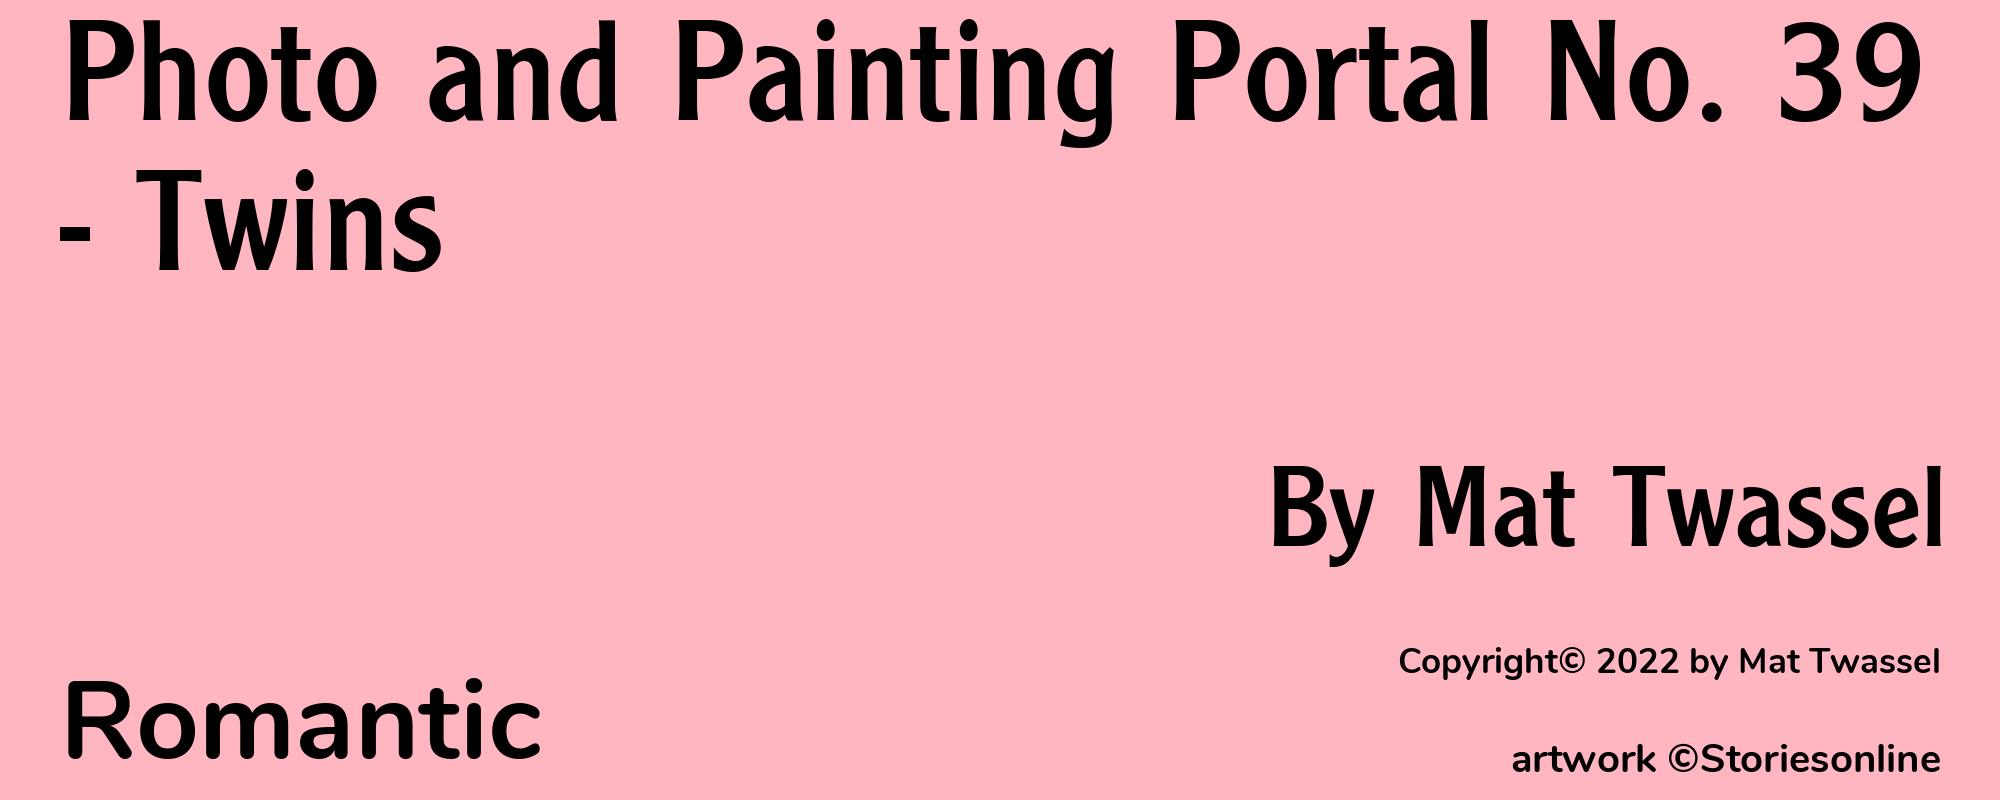 Photo and Painting Portal No. 39 - Twins - Cover